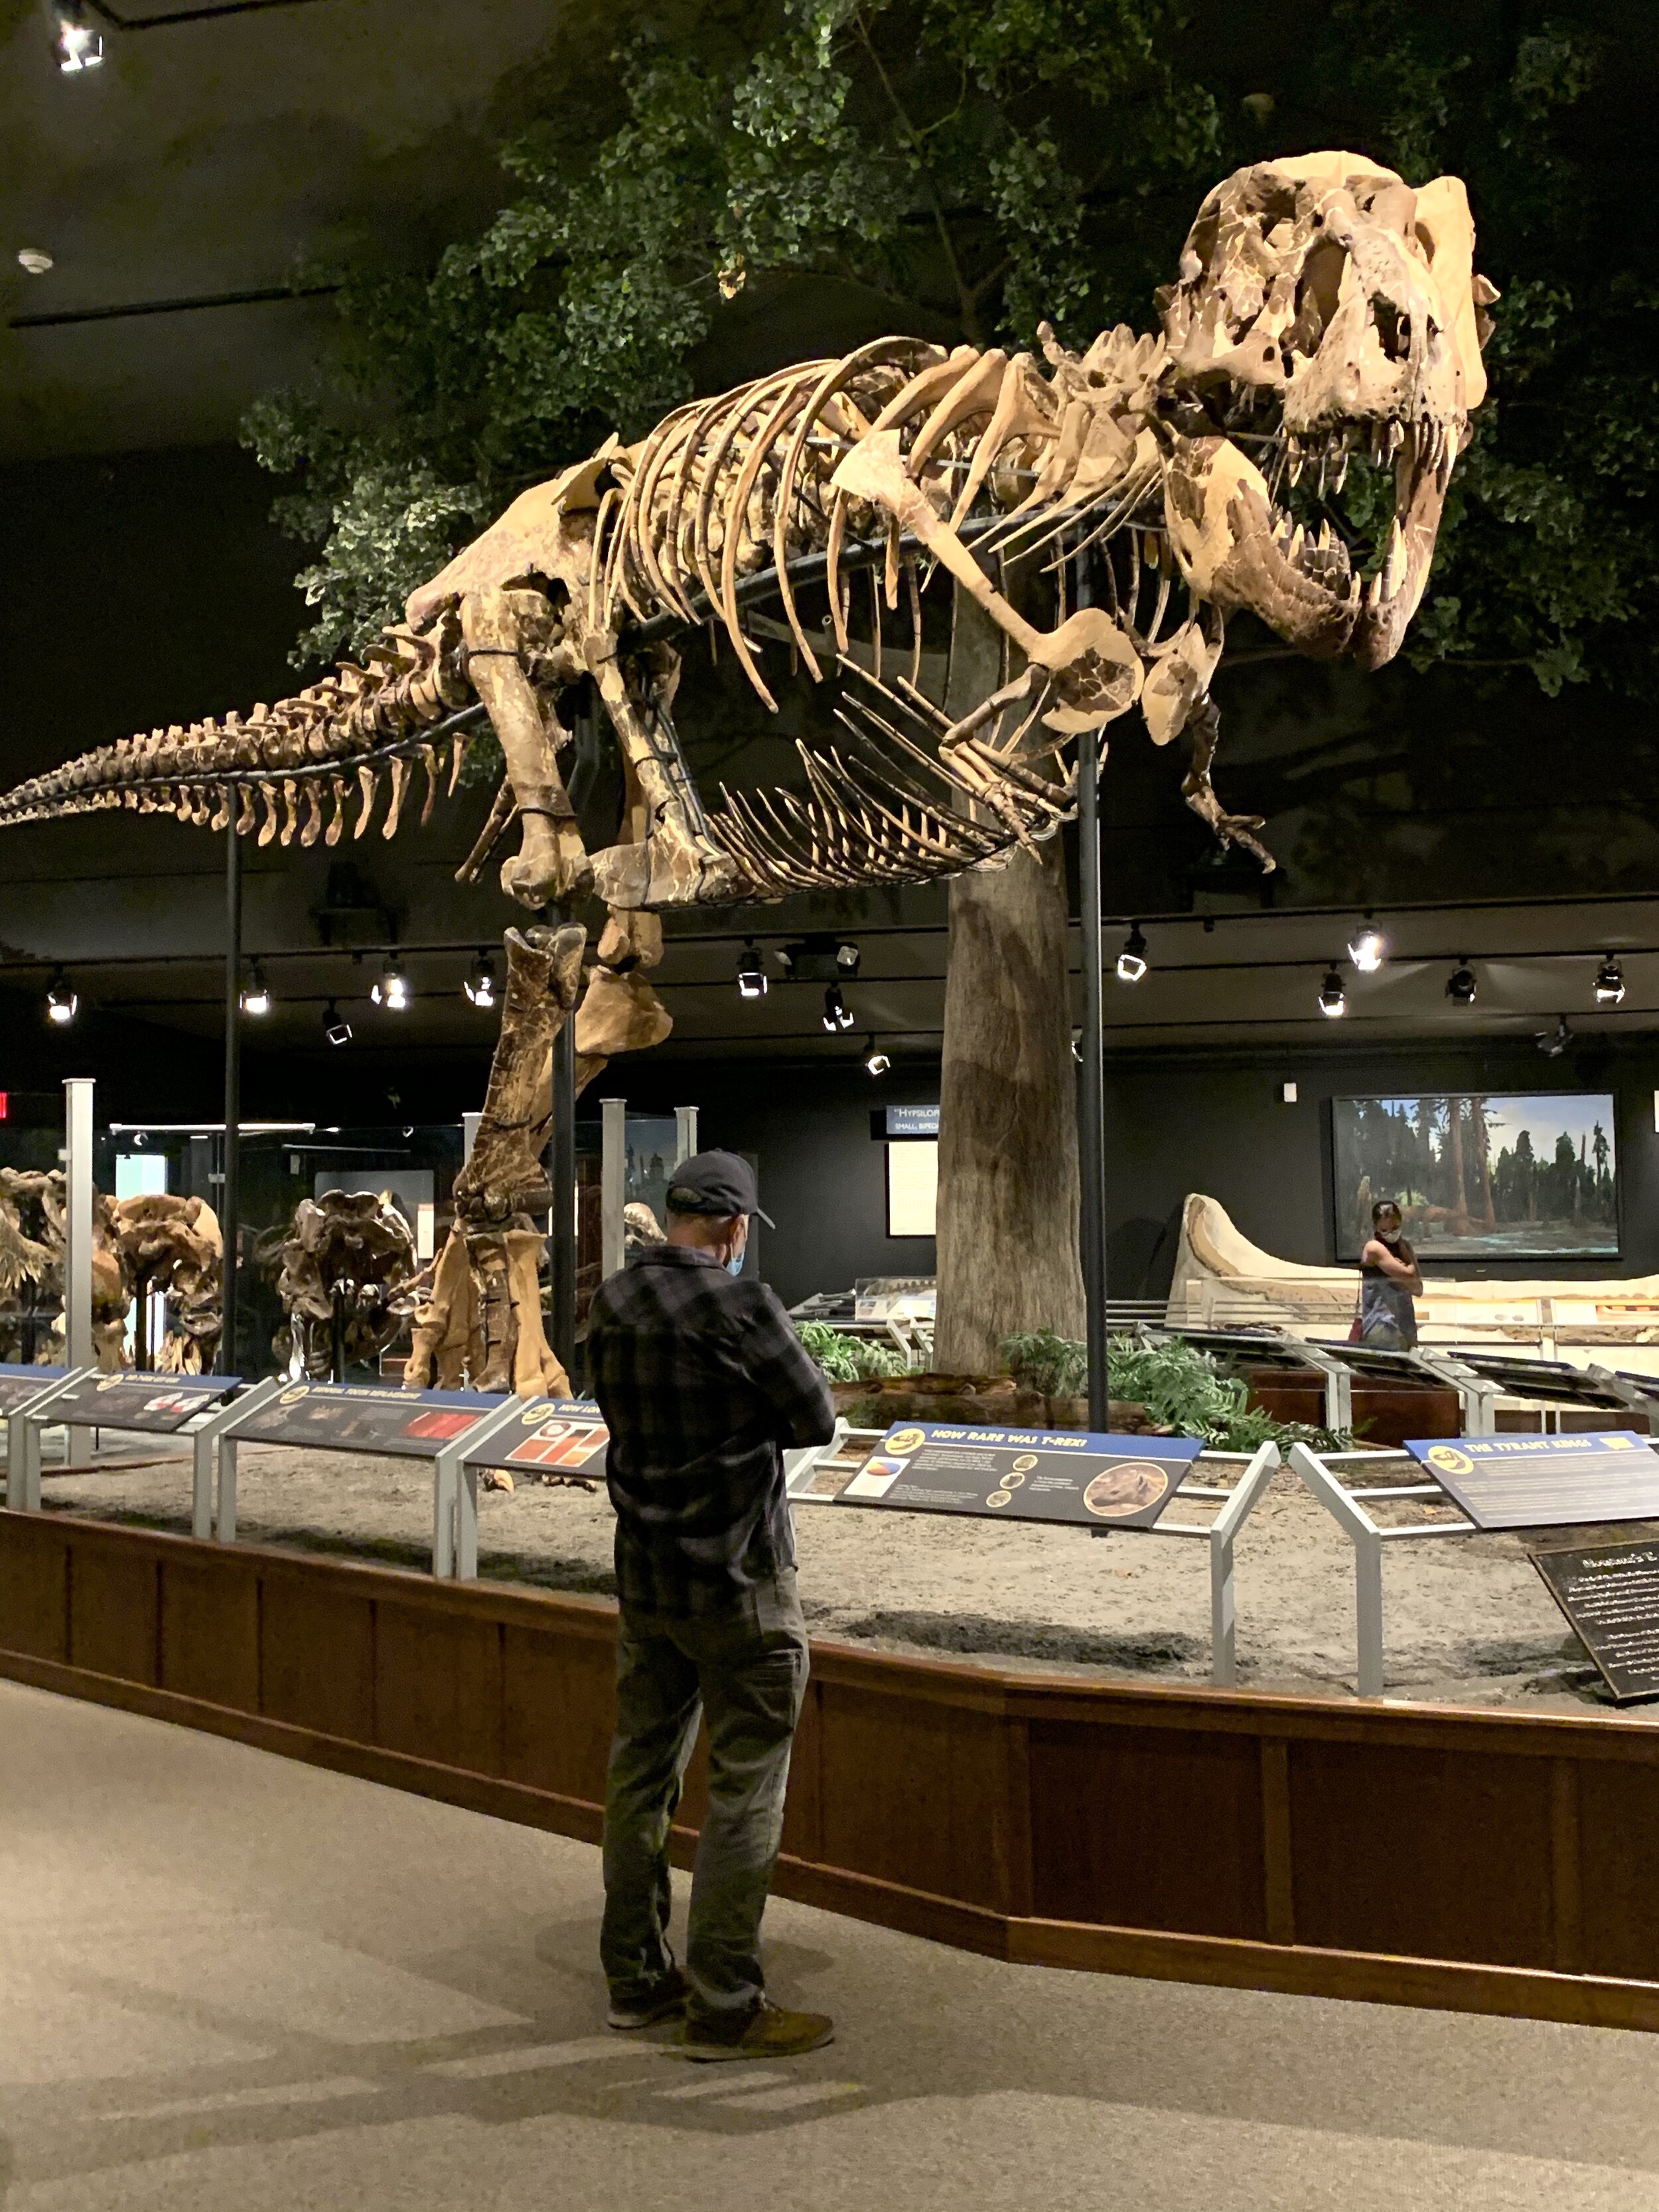  In Bozeman, we visited   The Museum of the Rockies  , a division of Montana State University. This museum is one of the most sophisticated research and history museums in the world, with one of the largest dinosaur fossil collections in the world. 